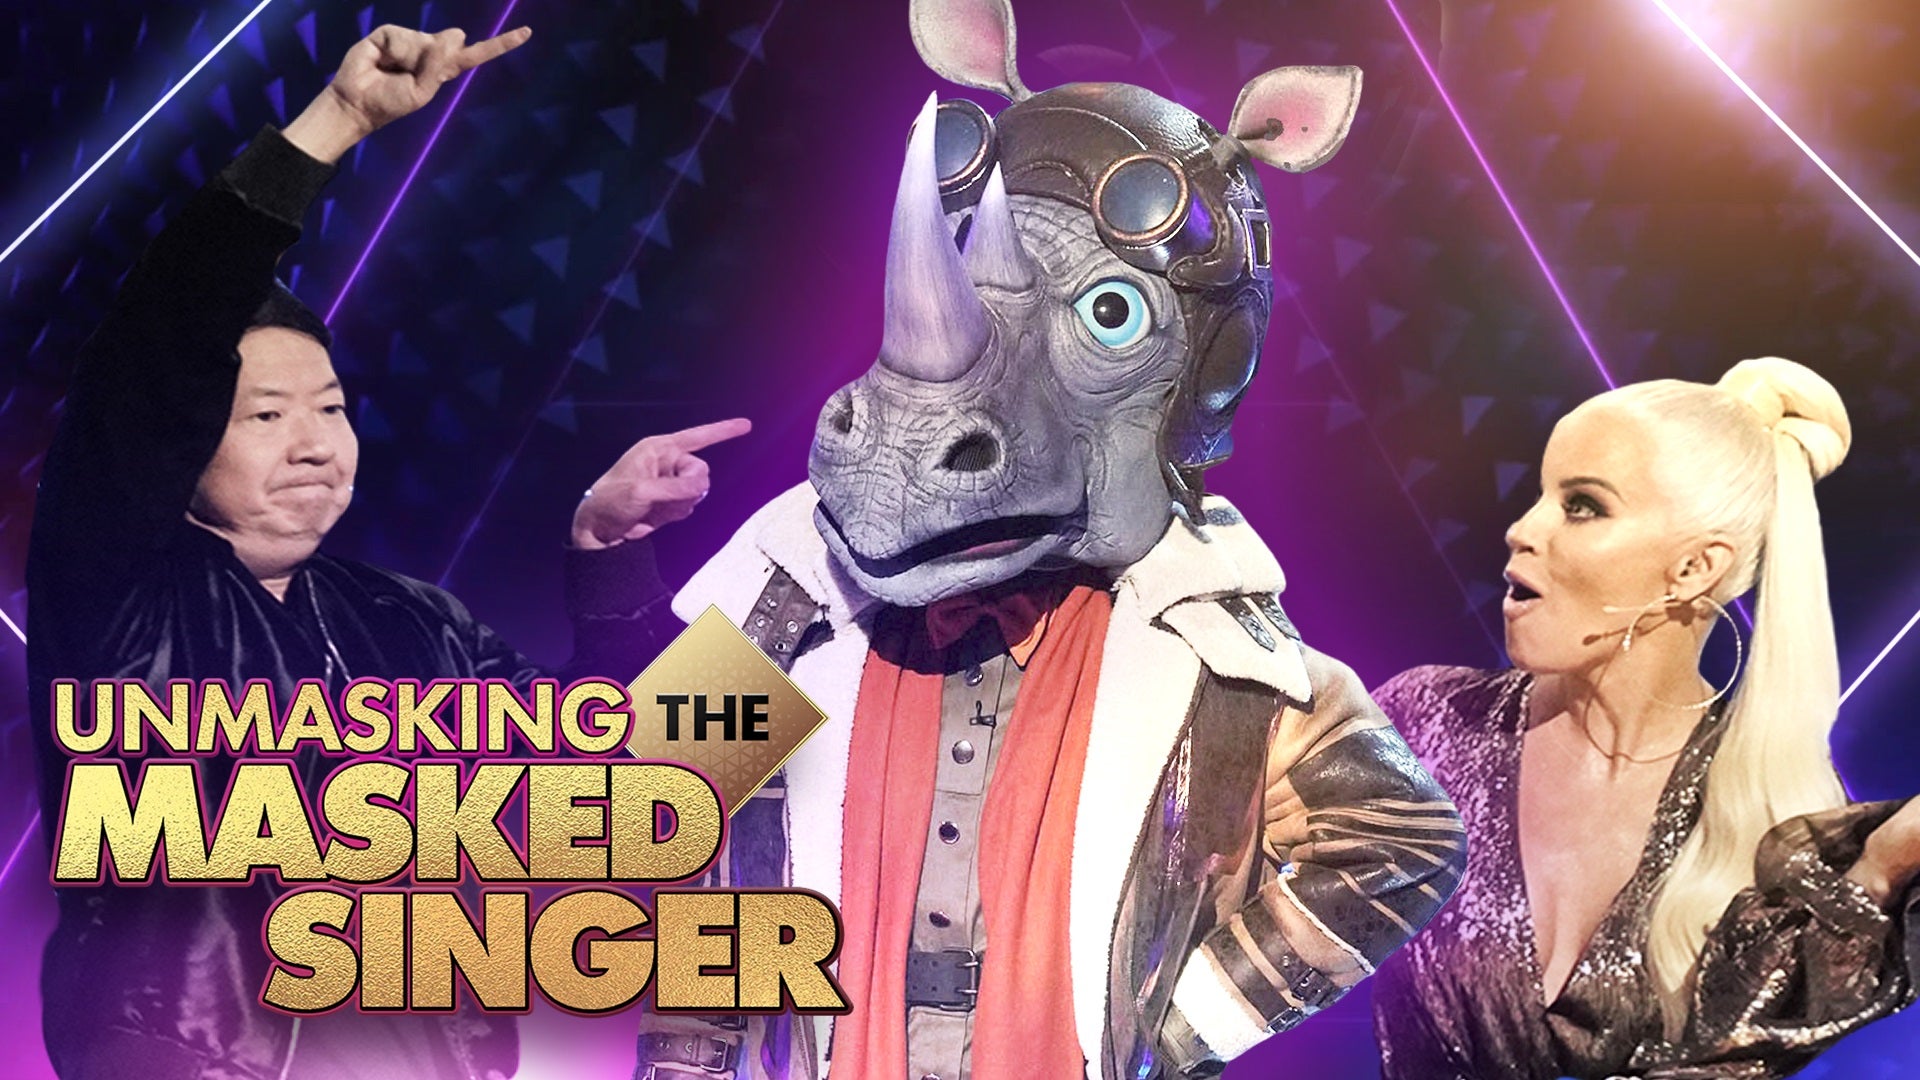 Masked Singer: Rhino could be Barry Zito according to clues